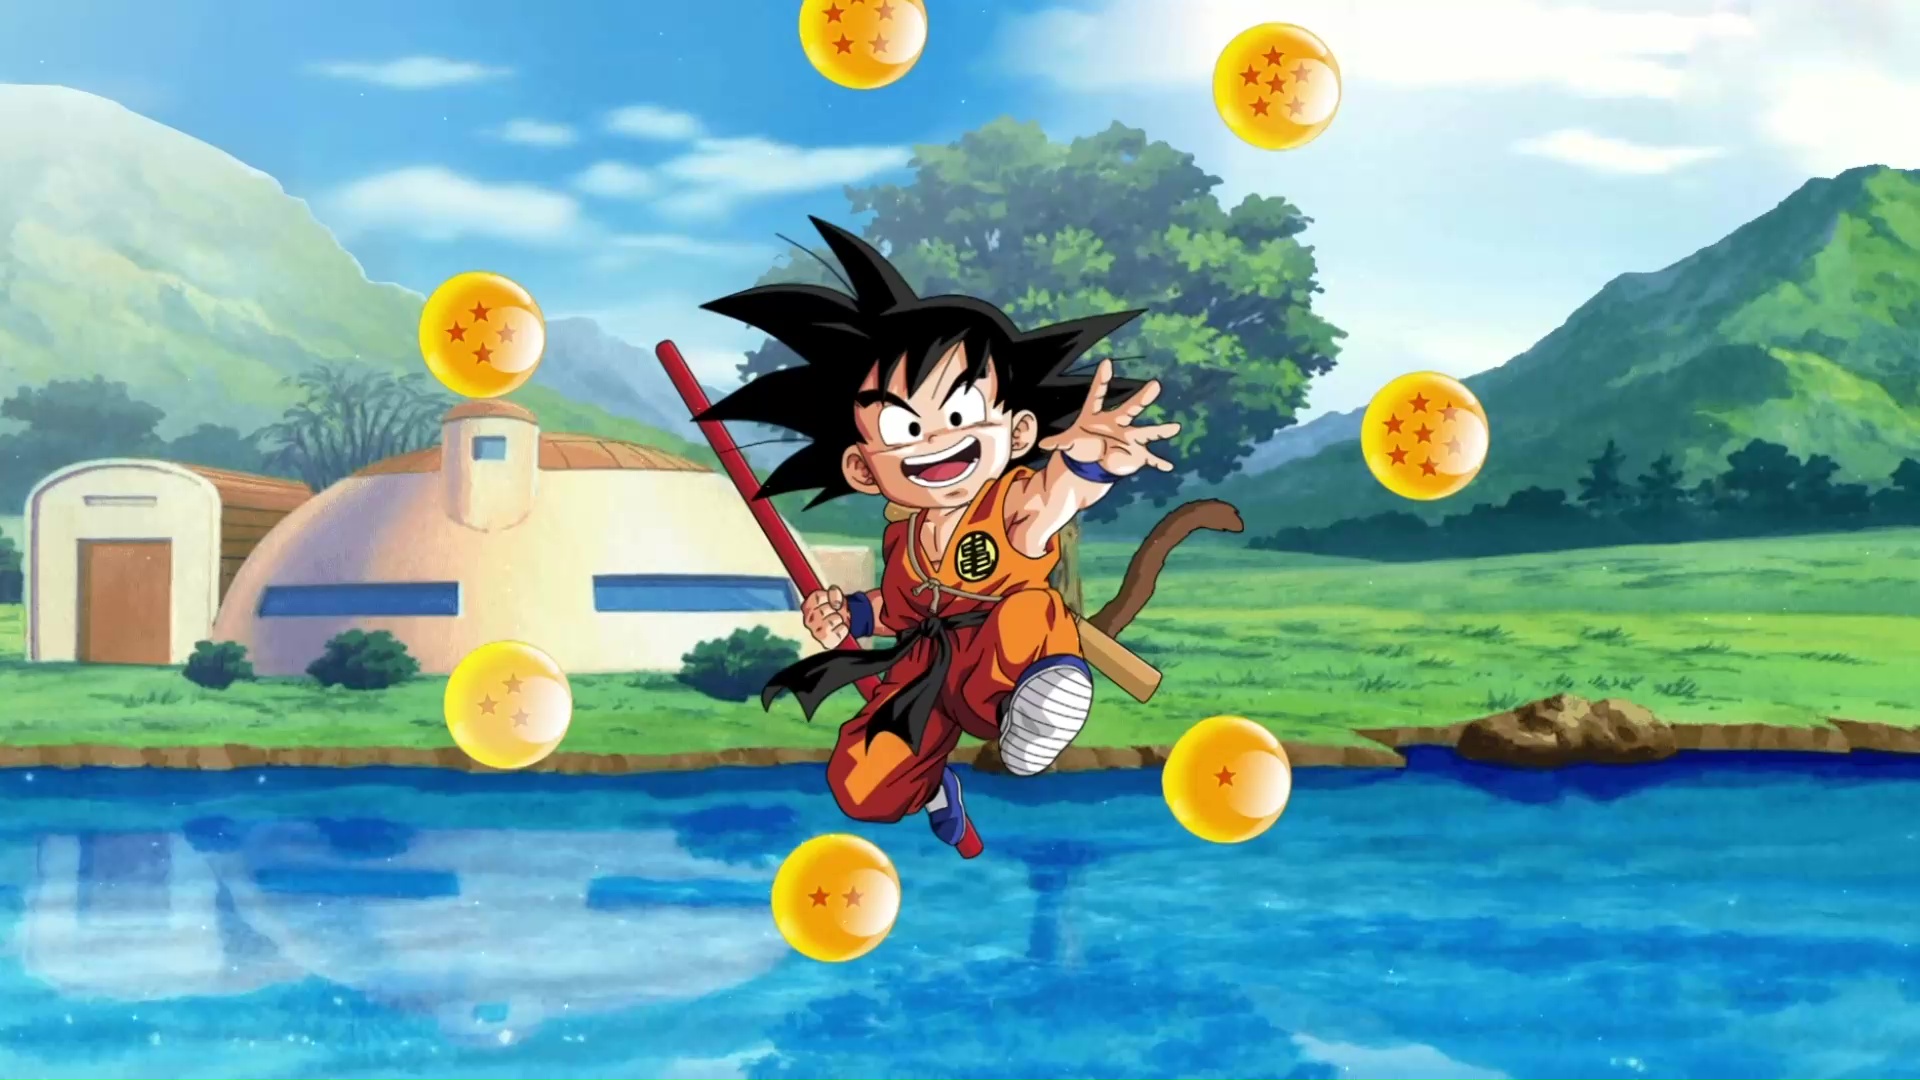 Live Wallpapers tagged with Goku